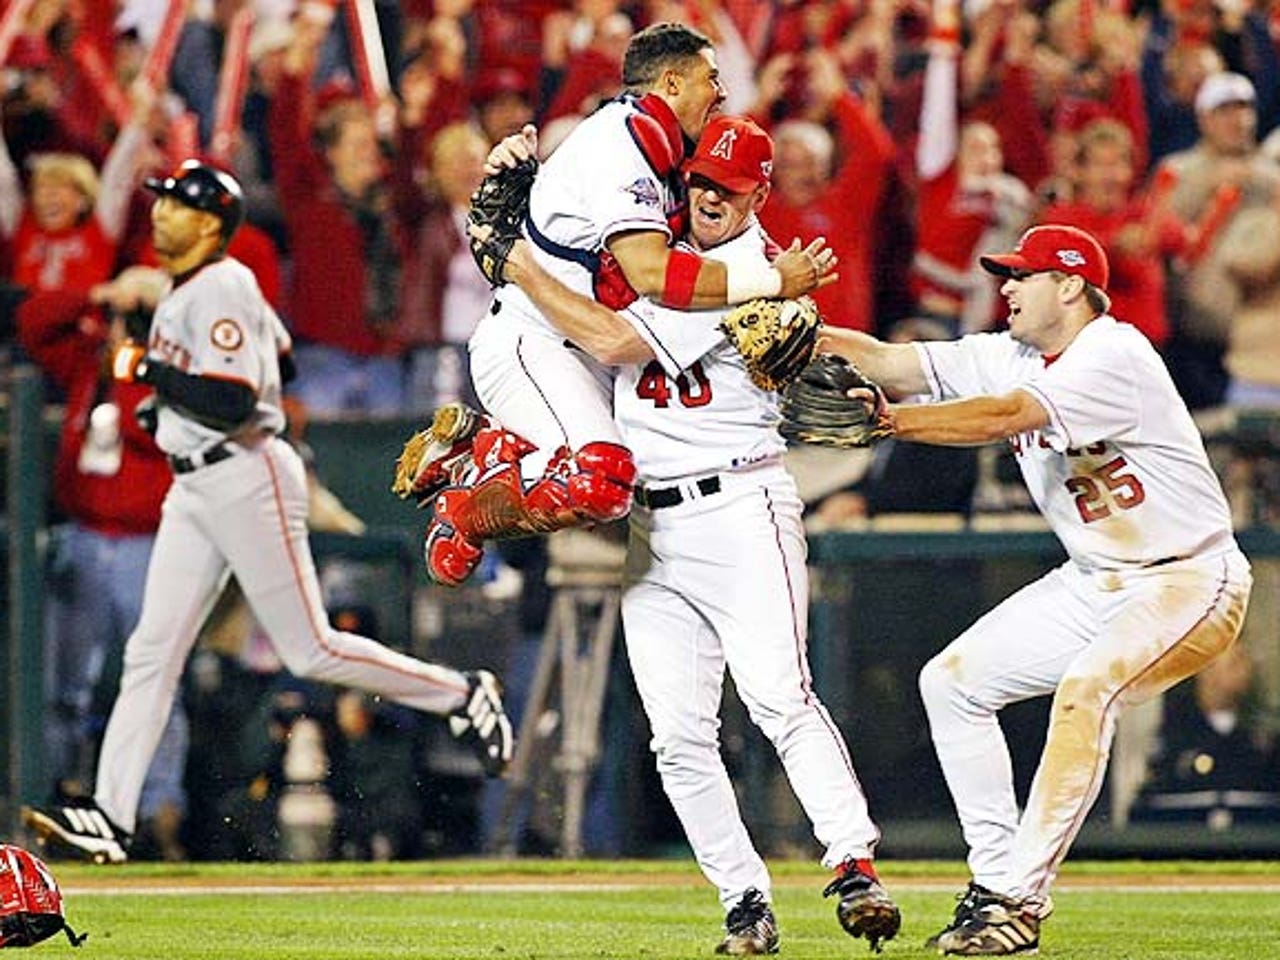 10/27/2002: Angels win franchise's first World Series